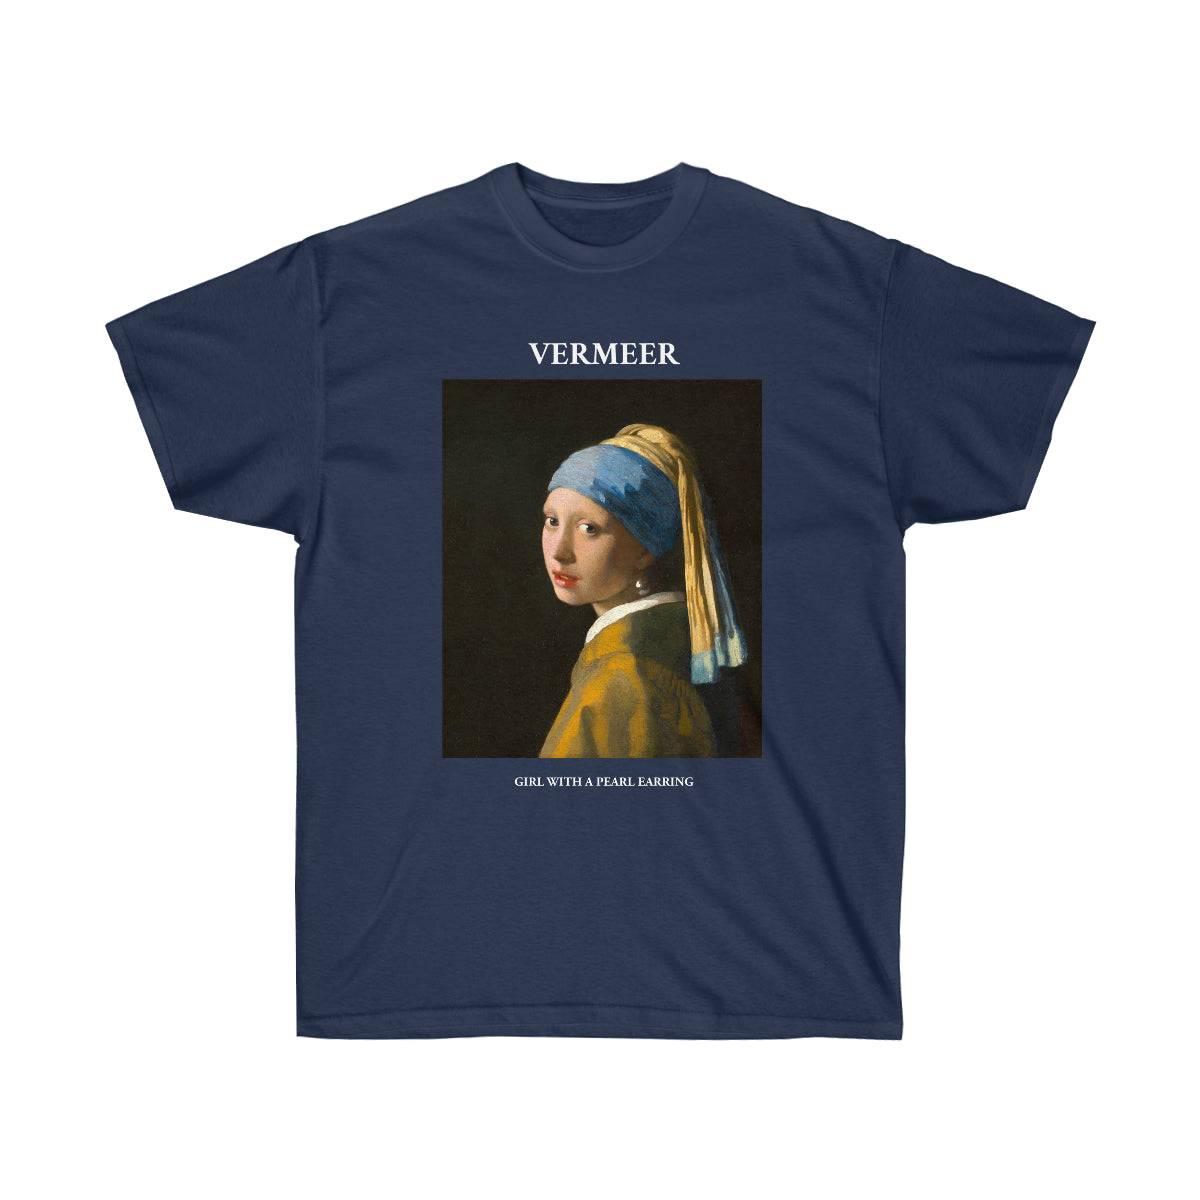 Vermeer Girl with a Pearl Earring T-shirt